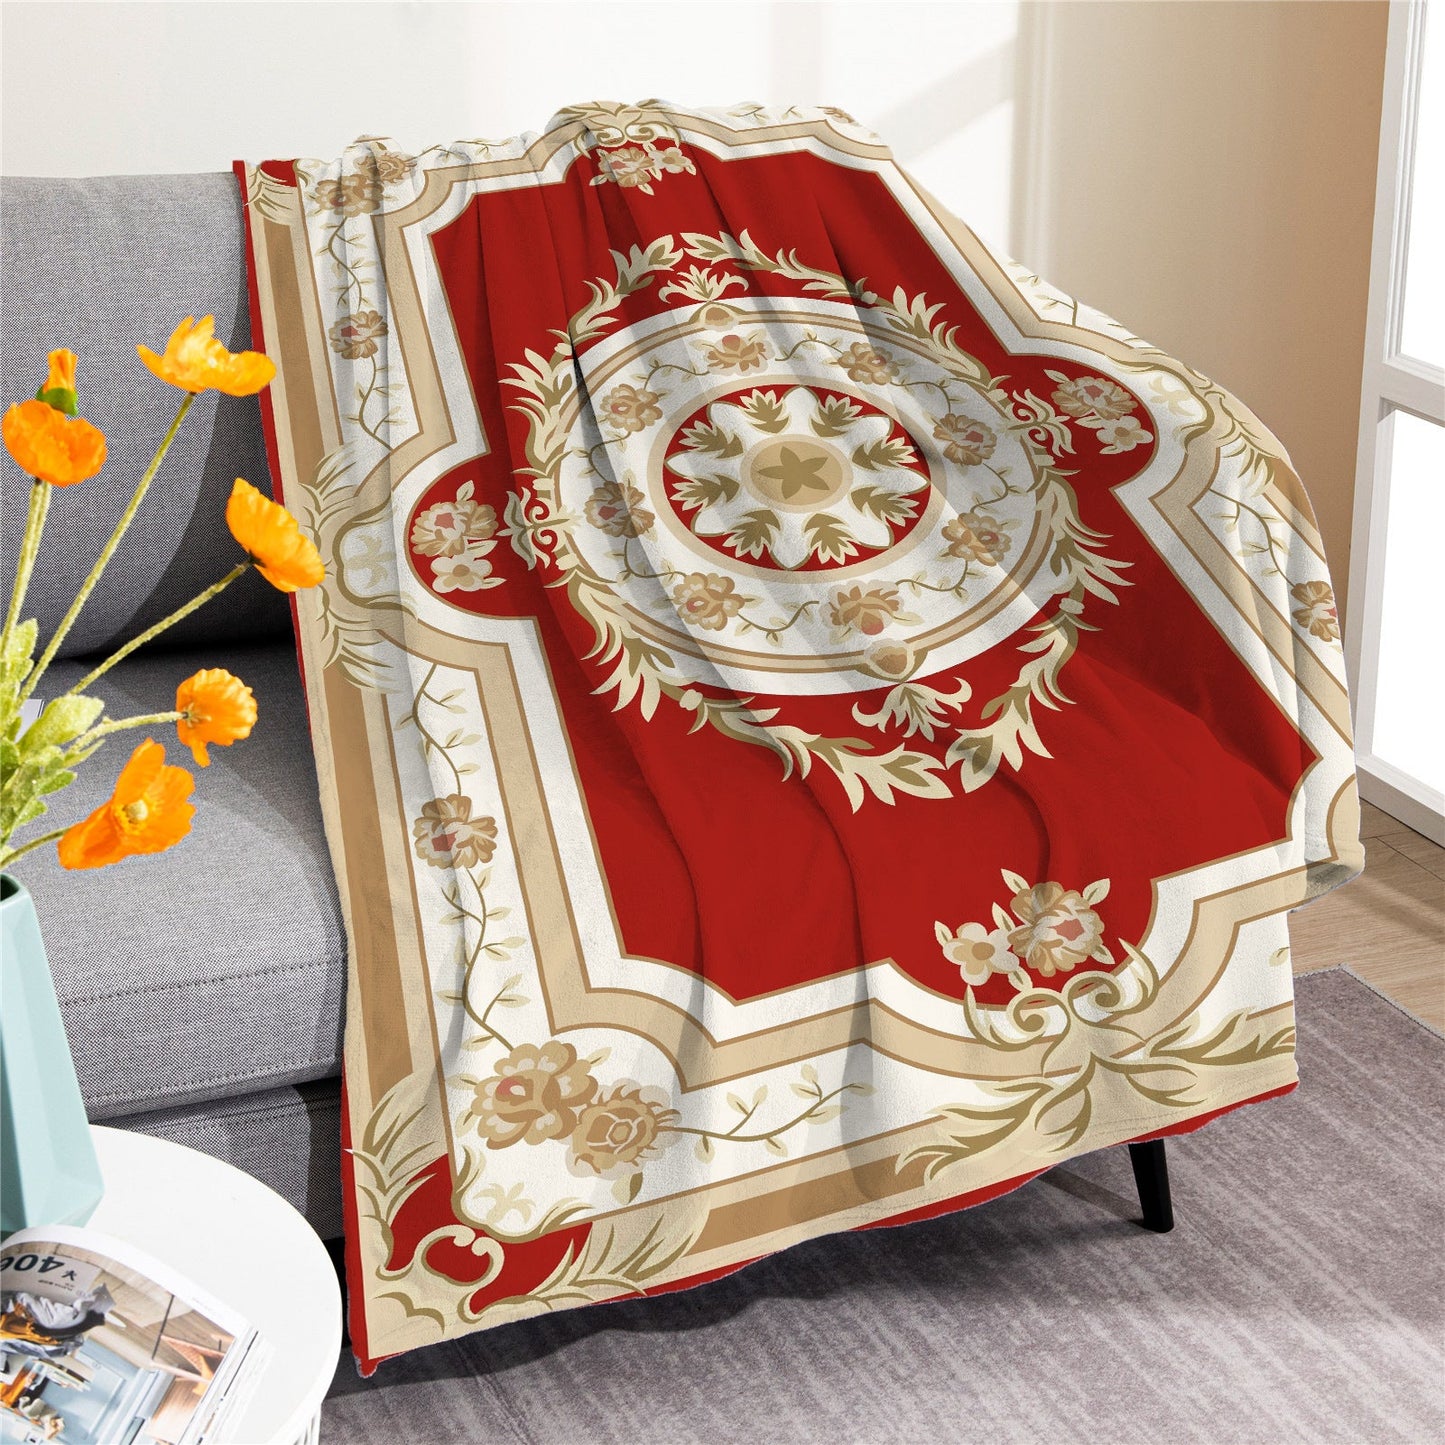 Vintage Boho Fleece Throw Blankets-Blankets-M20220701-33-50*60 Inches-Free Shipping at meselling99